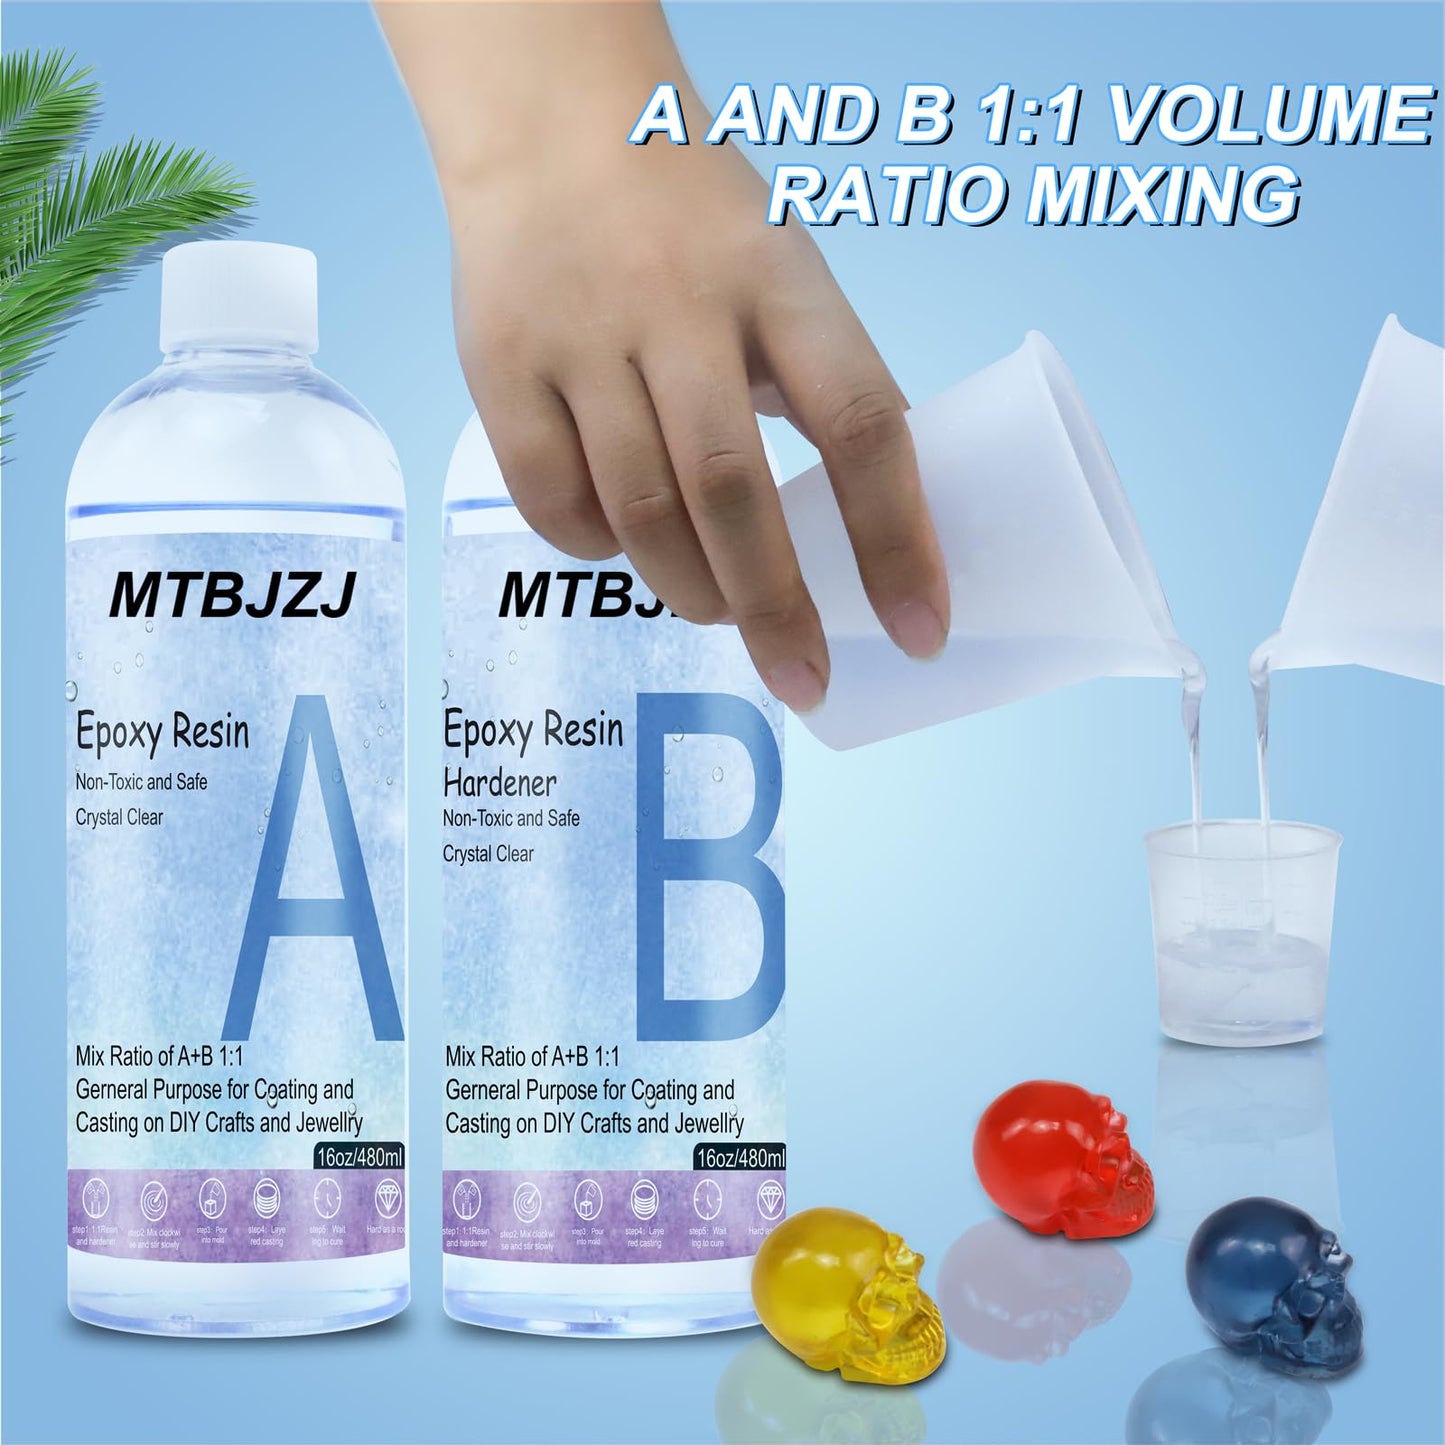 MTBJZJ 32OZ Quick Curing Epoxy Resin - 4 Hrs Demold Upgrade - Clear & Bubble Free Epoxy - Fast Demold 1:1 Mix Resin - High Hardness for Art, Jewelry, Casting - Ideal for Beginners